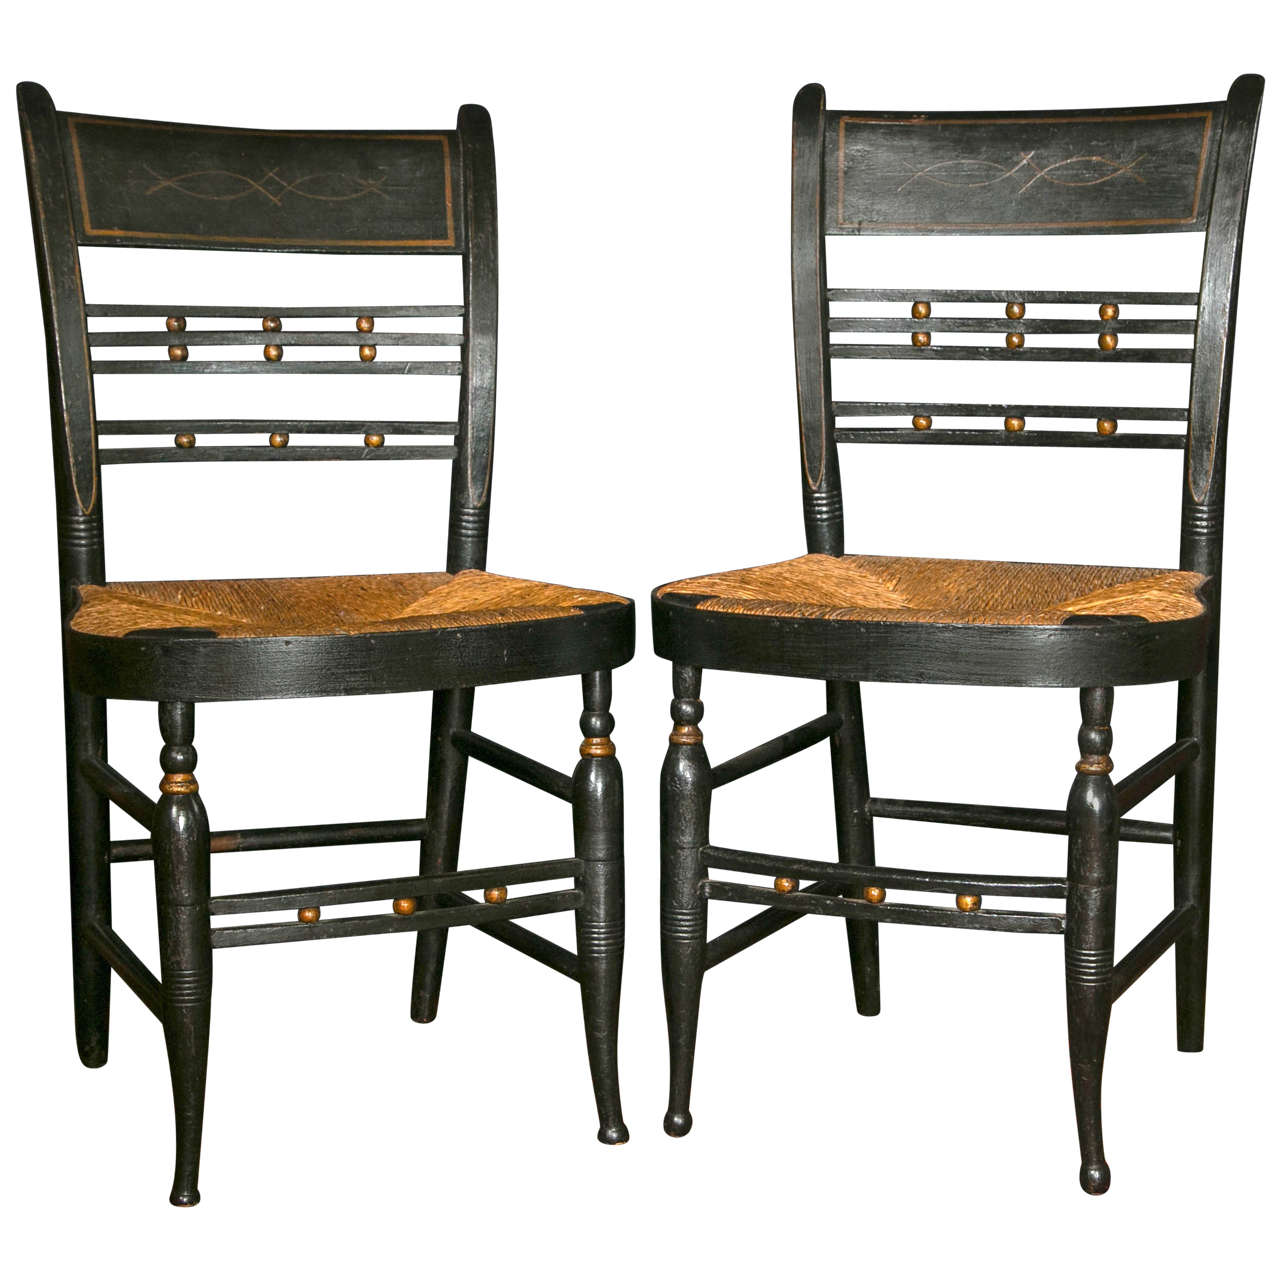 Pair of Painted Side Chairs